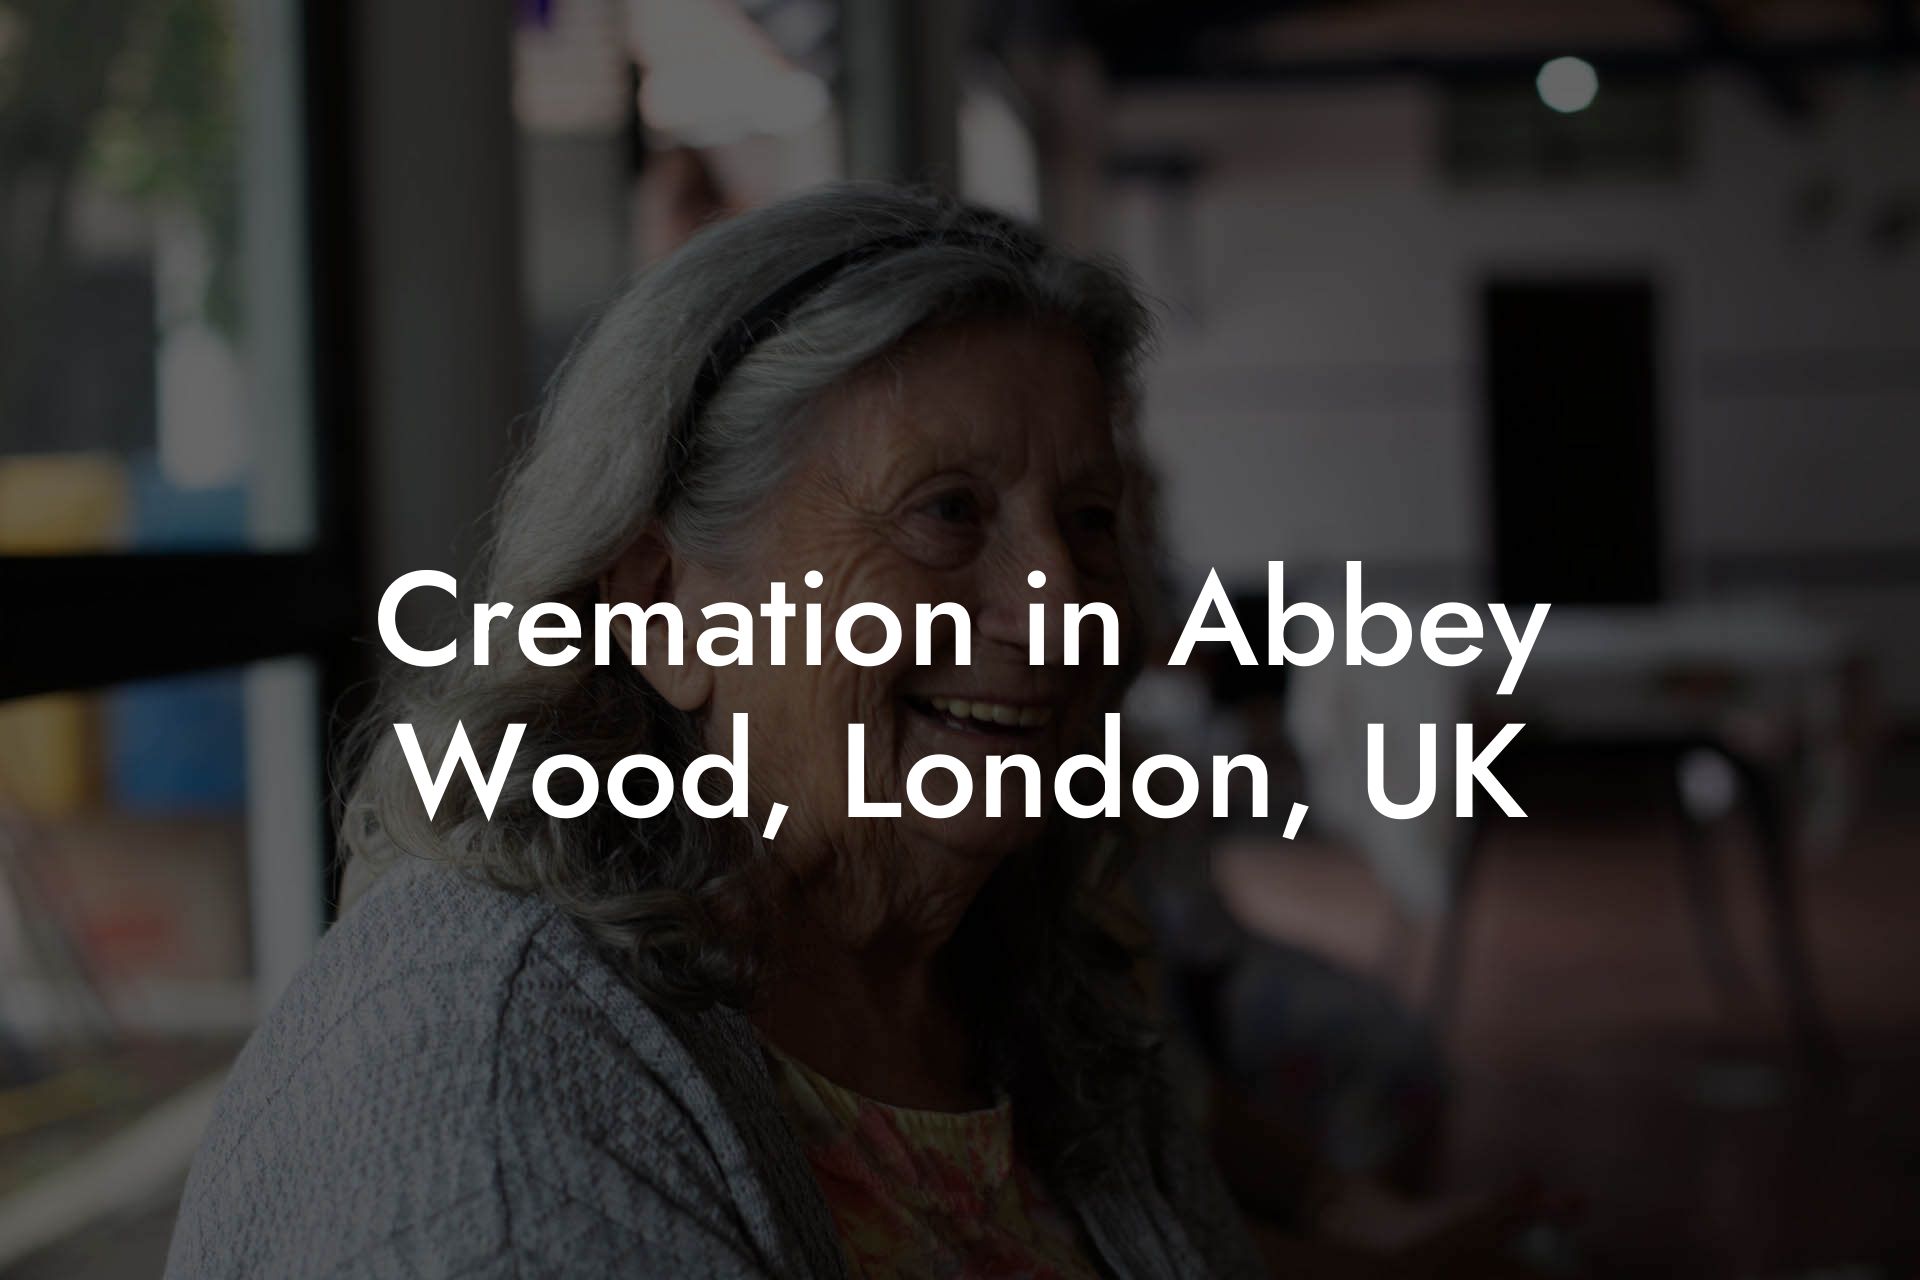 Cremation in Abbey Wood, London, UK